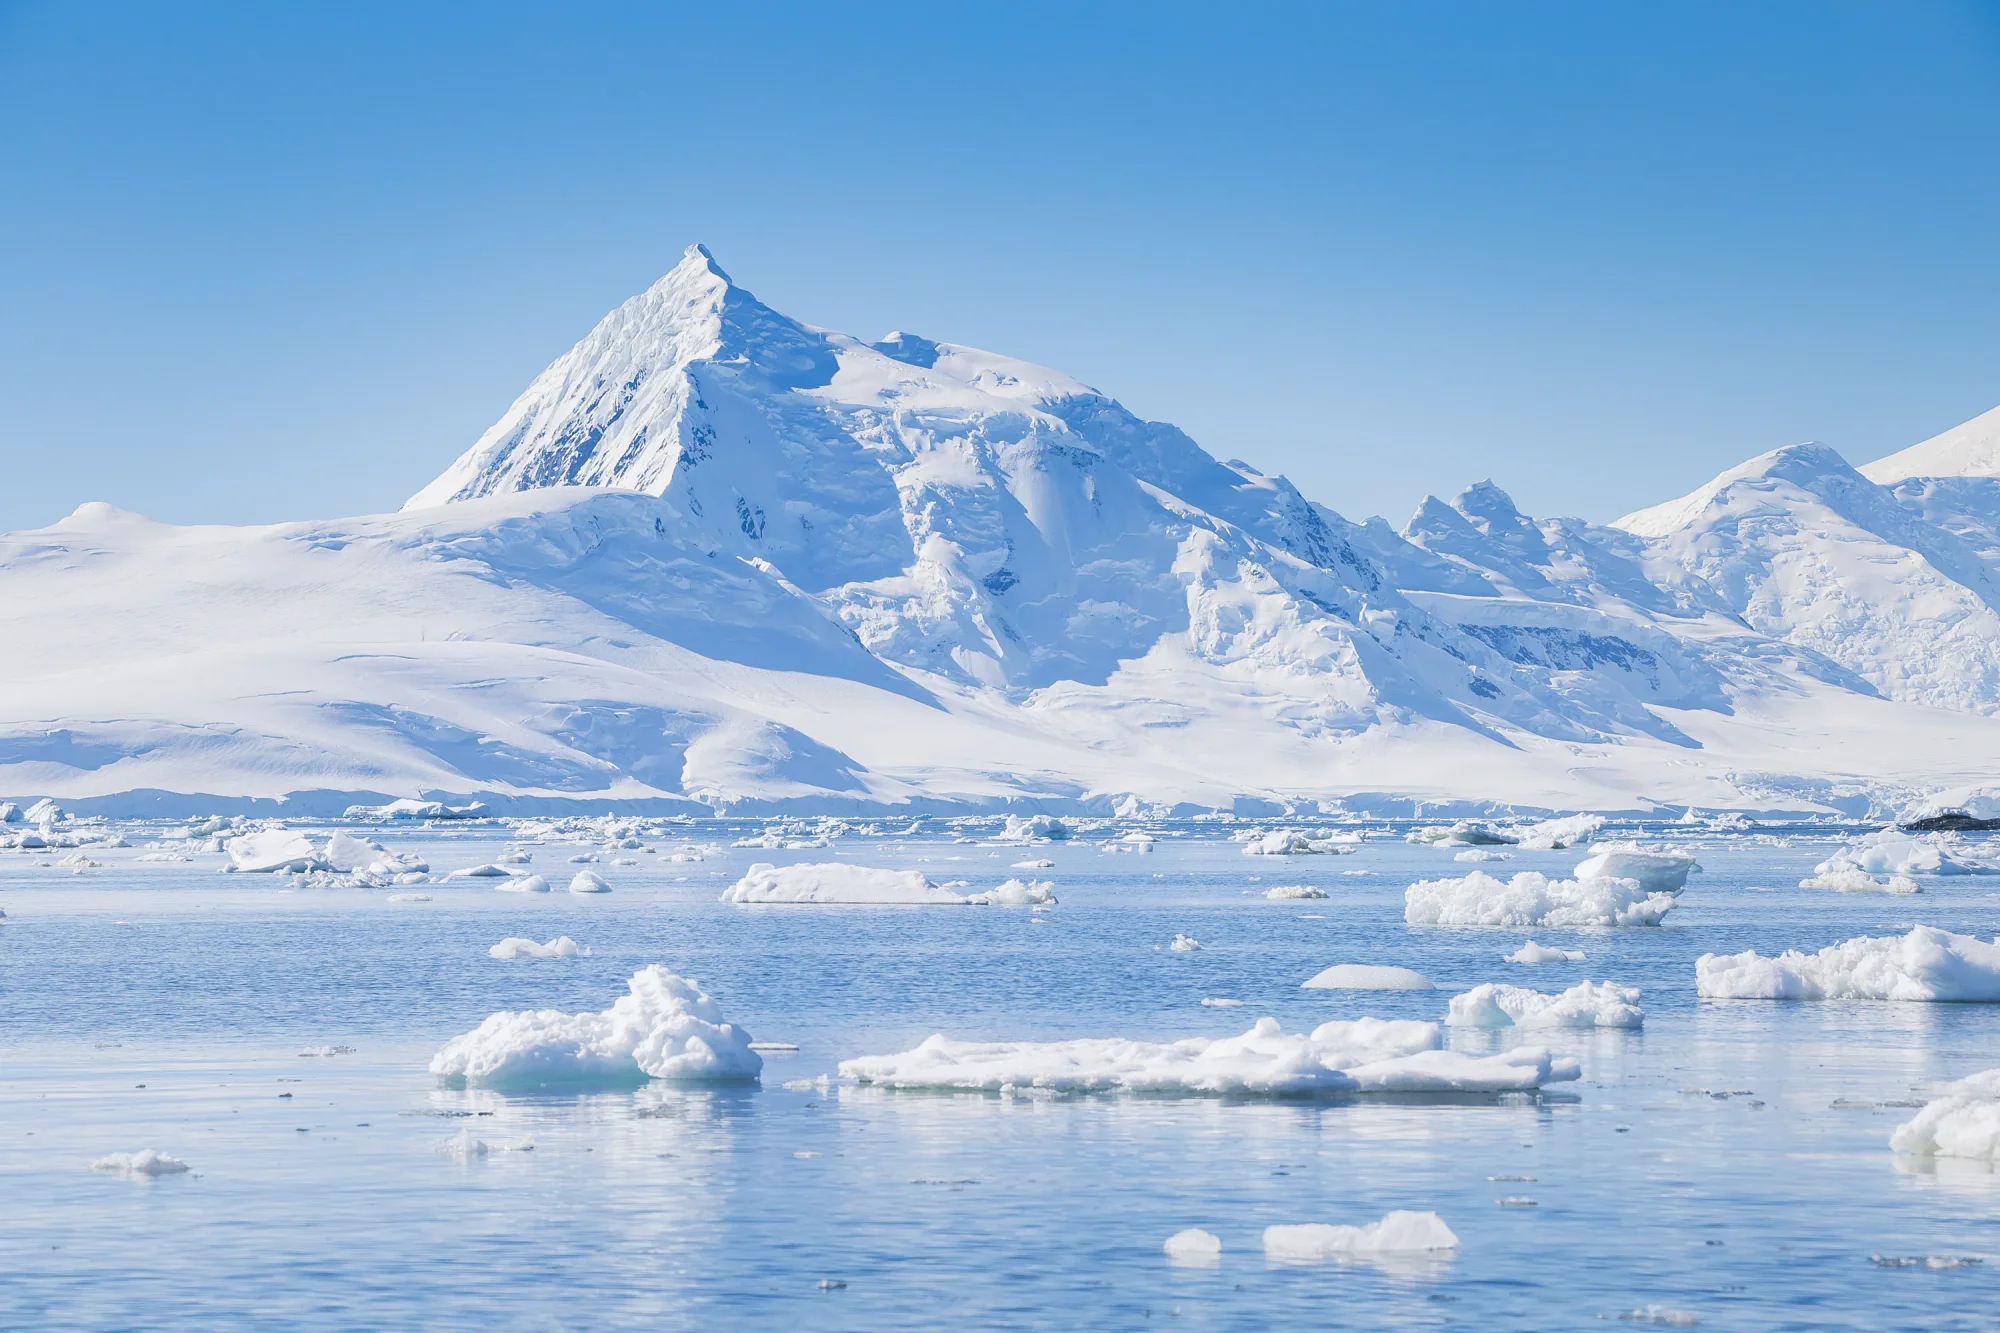 Antarctic landscape with glaciers, icebergs, and mountains. Where pure krill oil is sourced from.